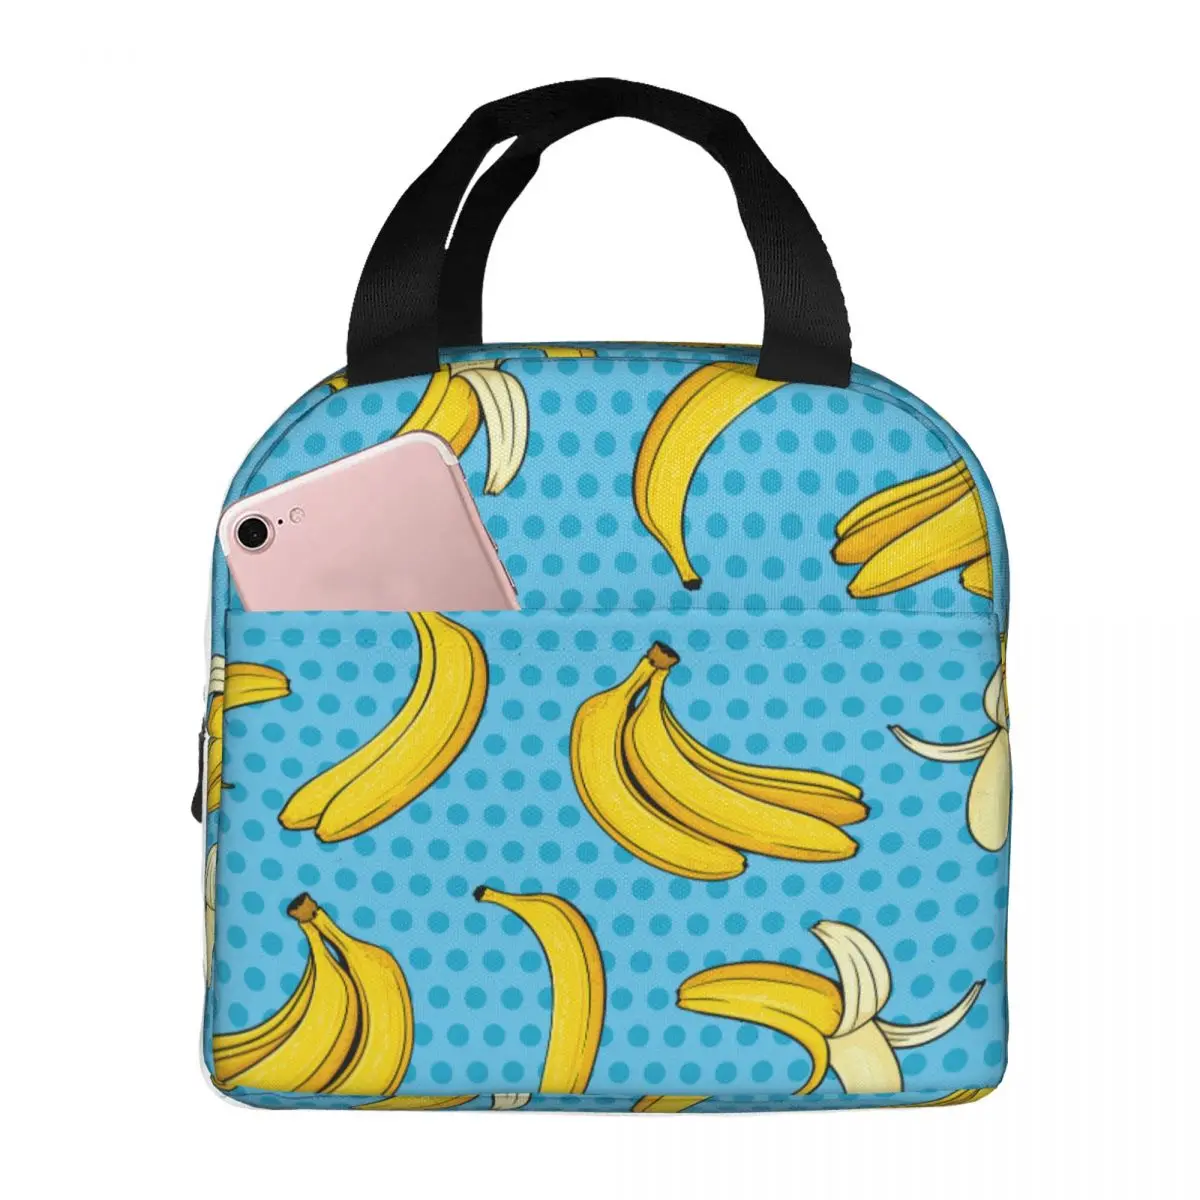 Banana Lunch Bags Portable Insulated Canvas Cooler Thermal School Lunch Box for Women Children